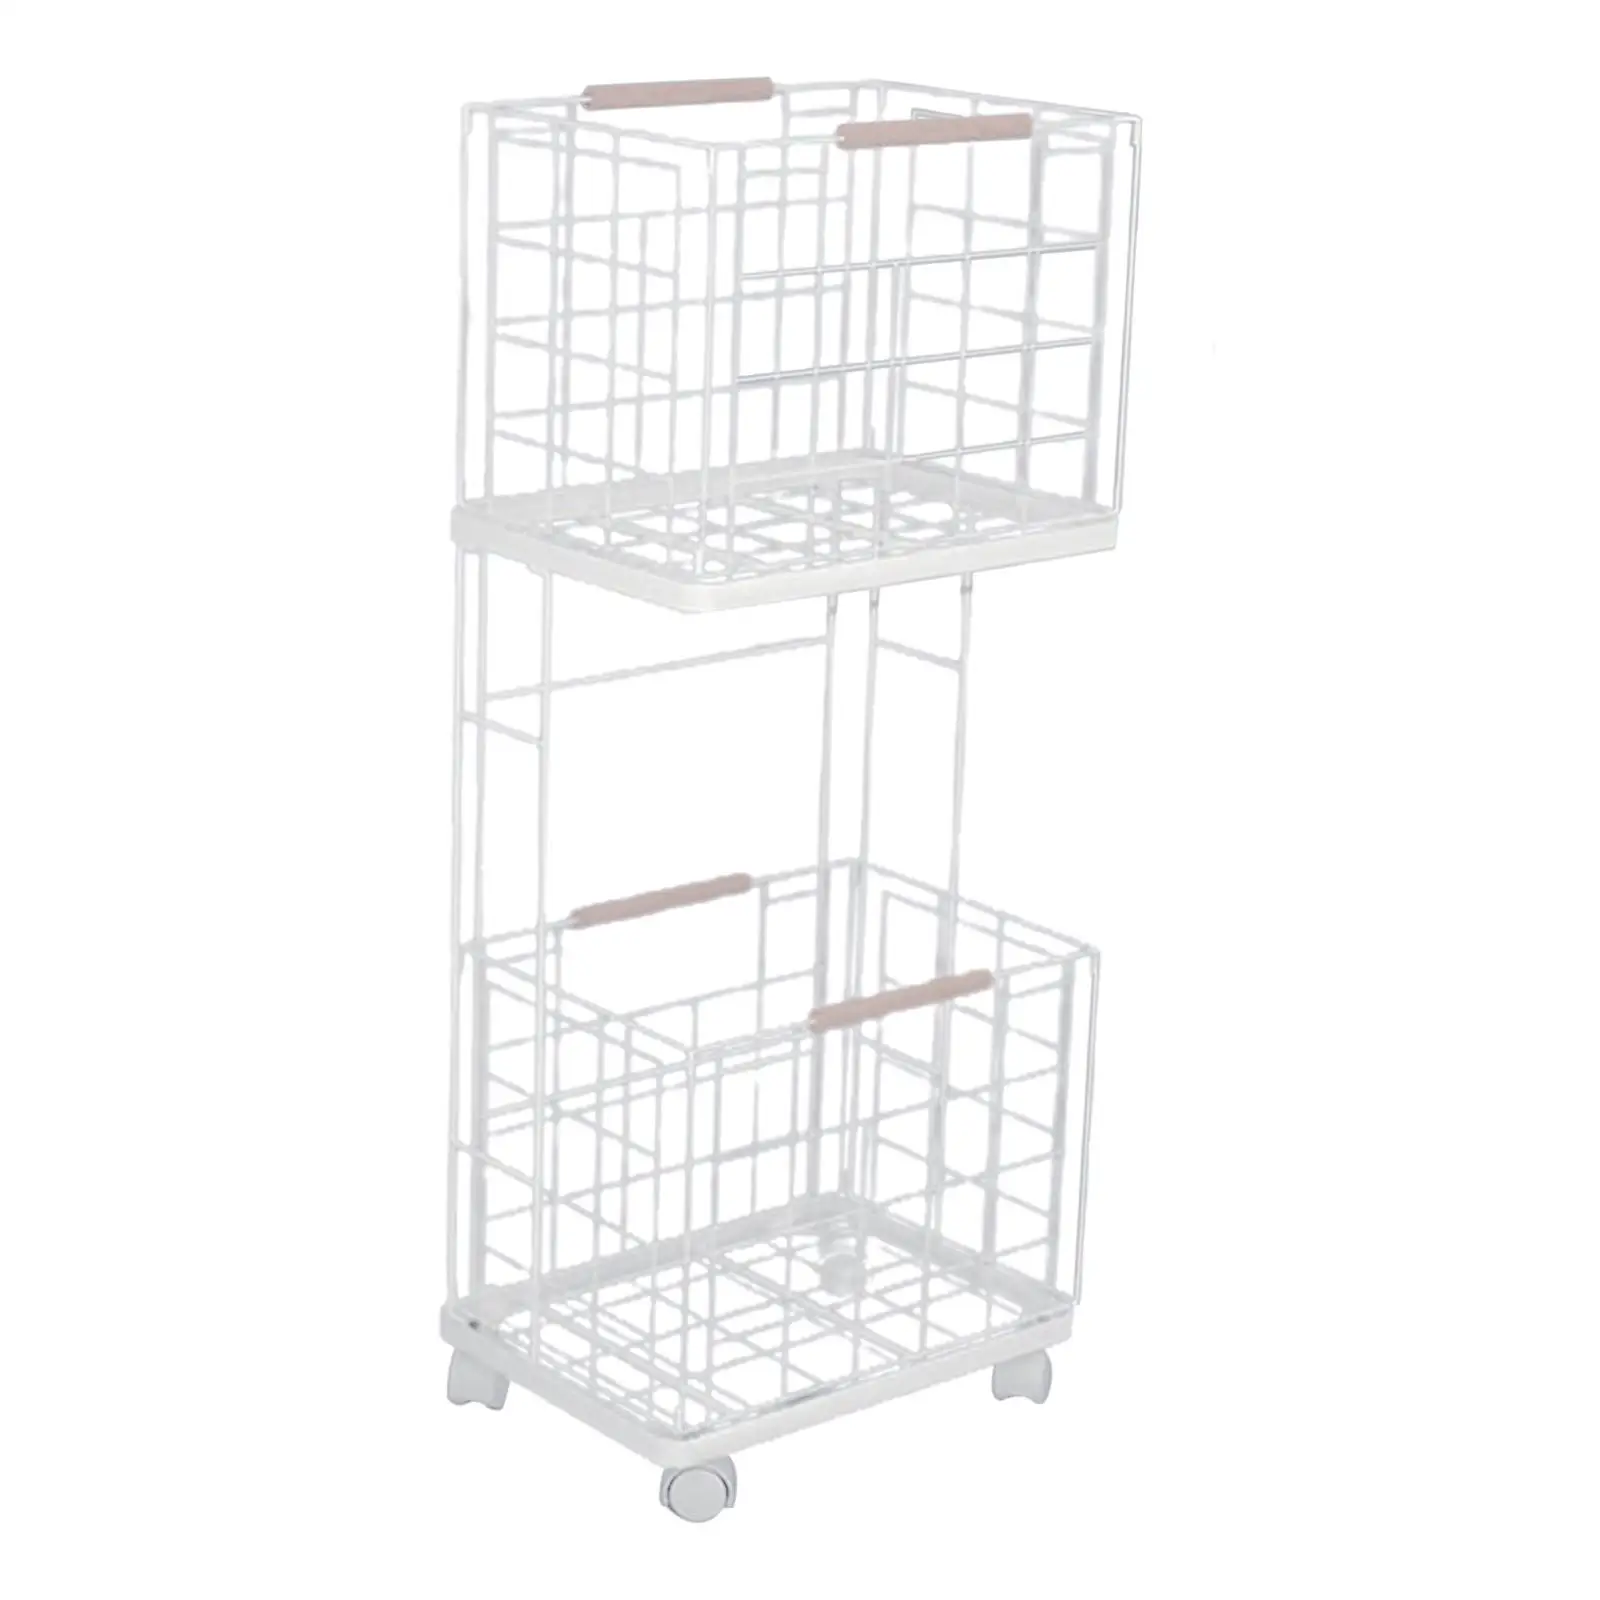 2 Tier Laundry Cart Removable Mobile Shelving Unit Storage Rack Laundry Clothes Basket for Bathrooom Home Farmhouse Kitchen